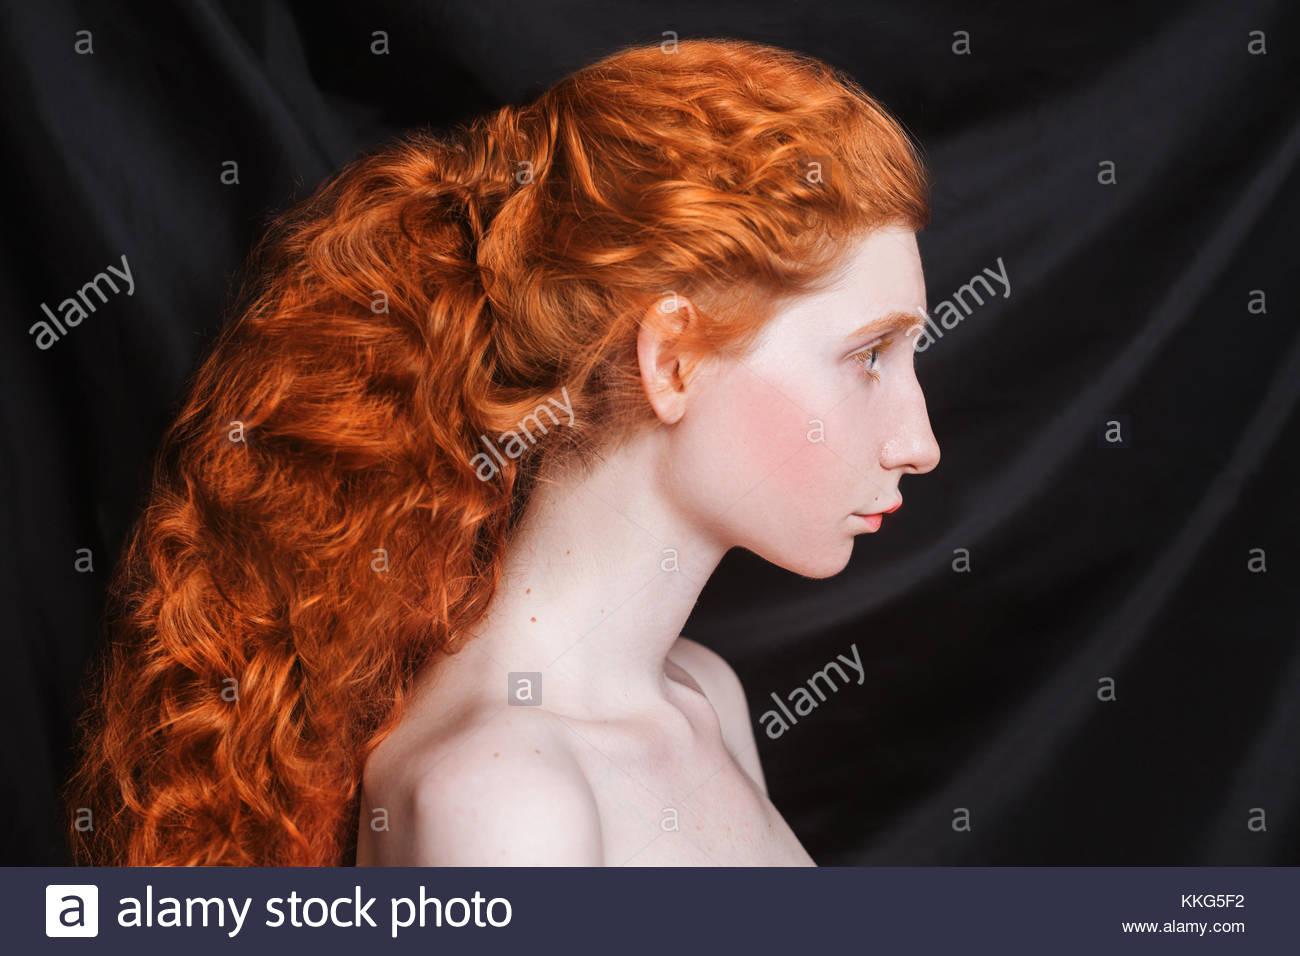 Makeup For Red Hair And Brown Eyes Woman With Long Curly Red Hair Gathered In Ponytail On Black Stock